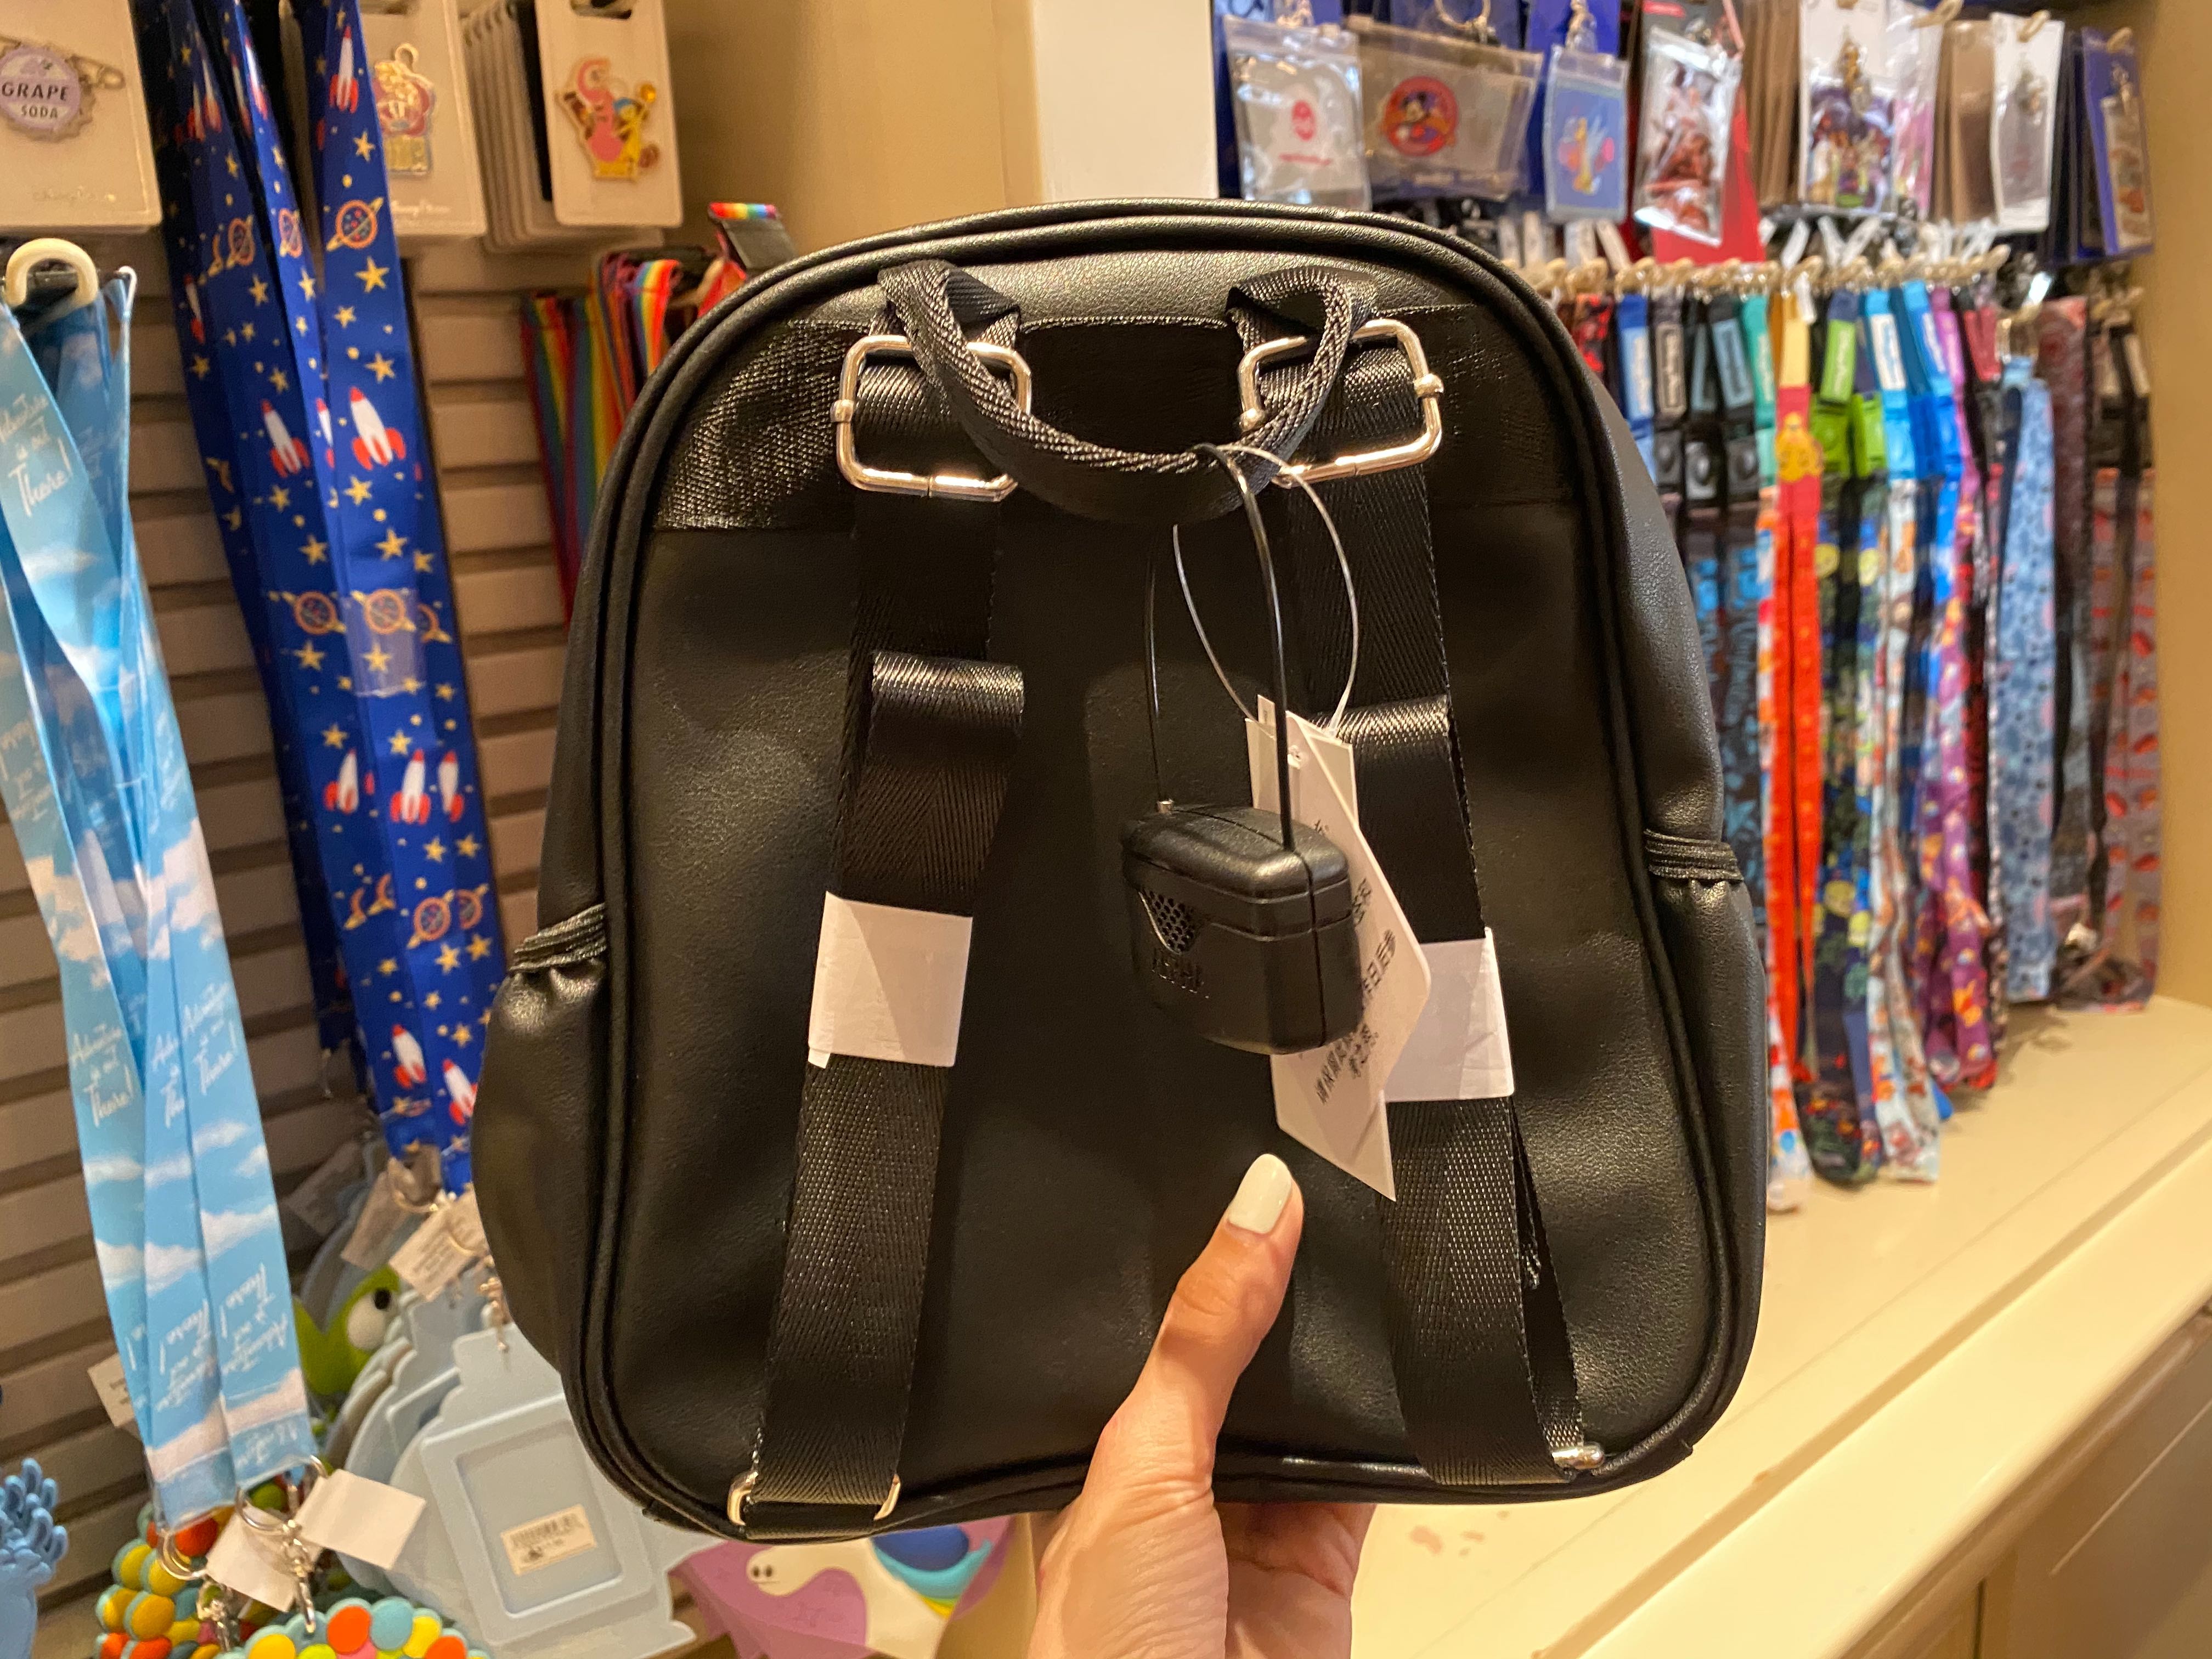 PHOTOS New Disney Pin Trading Bags for Every Style Arrive